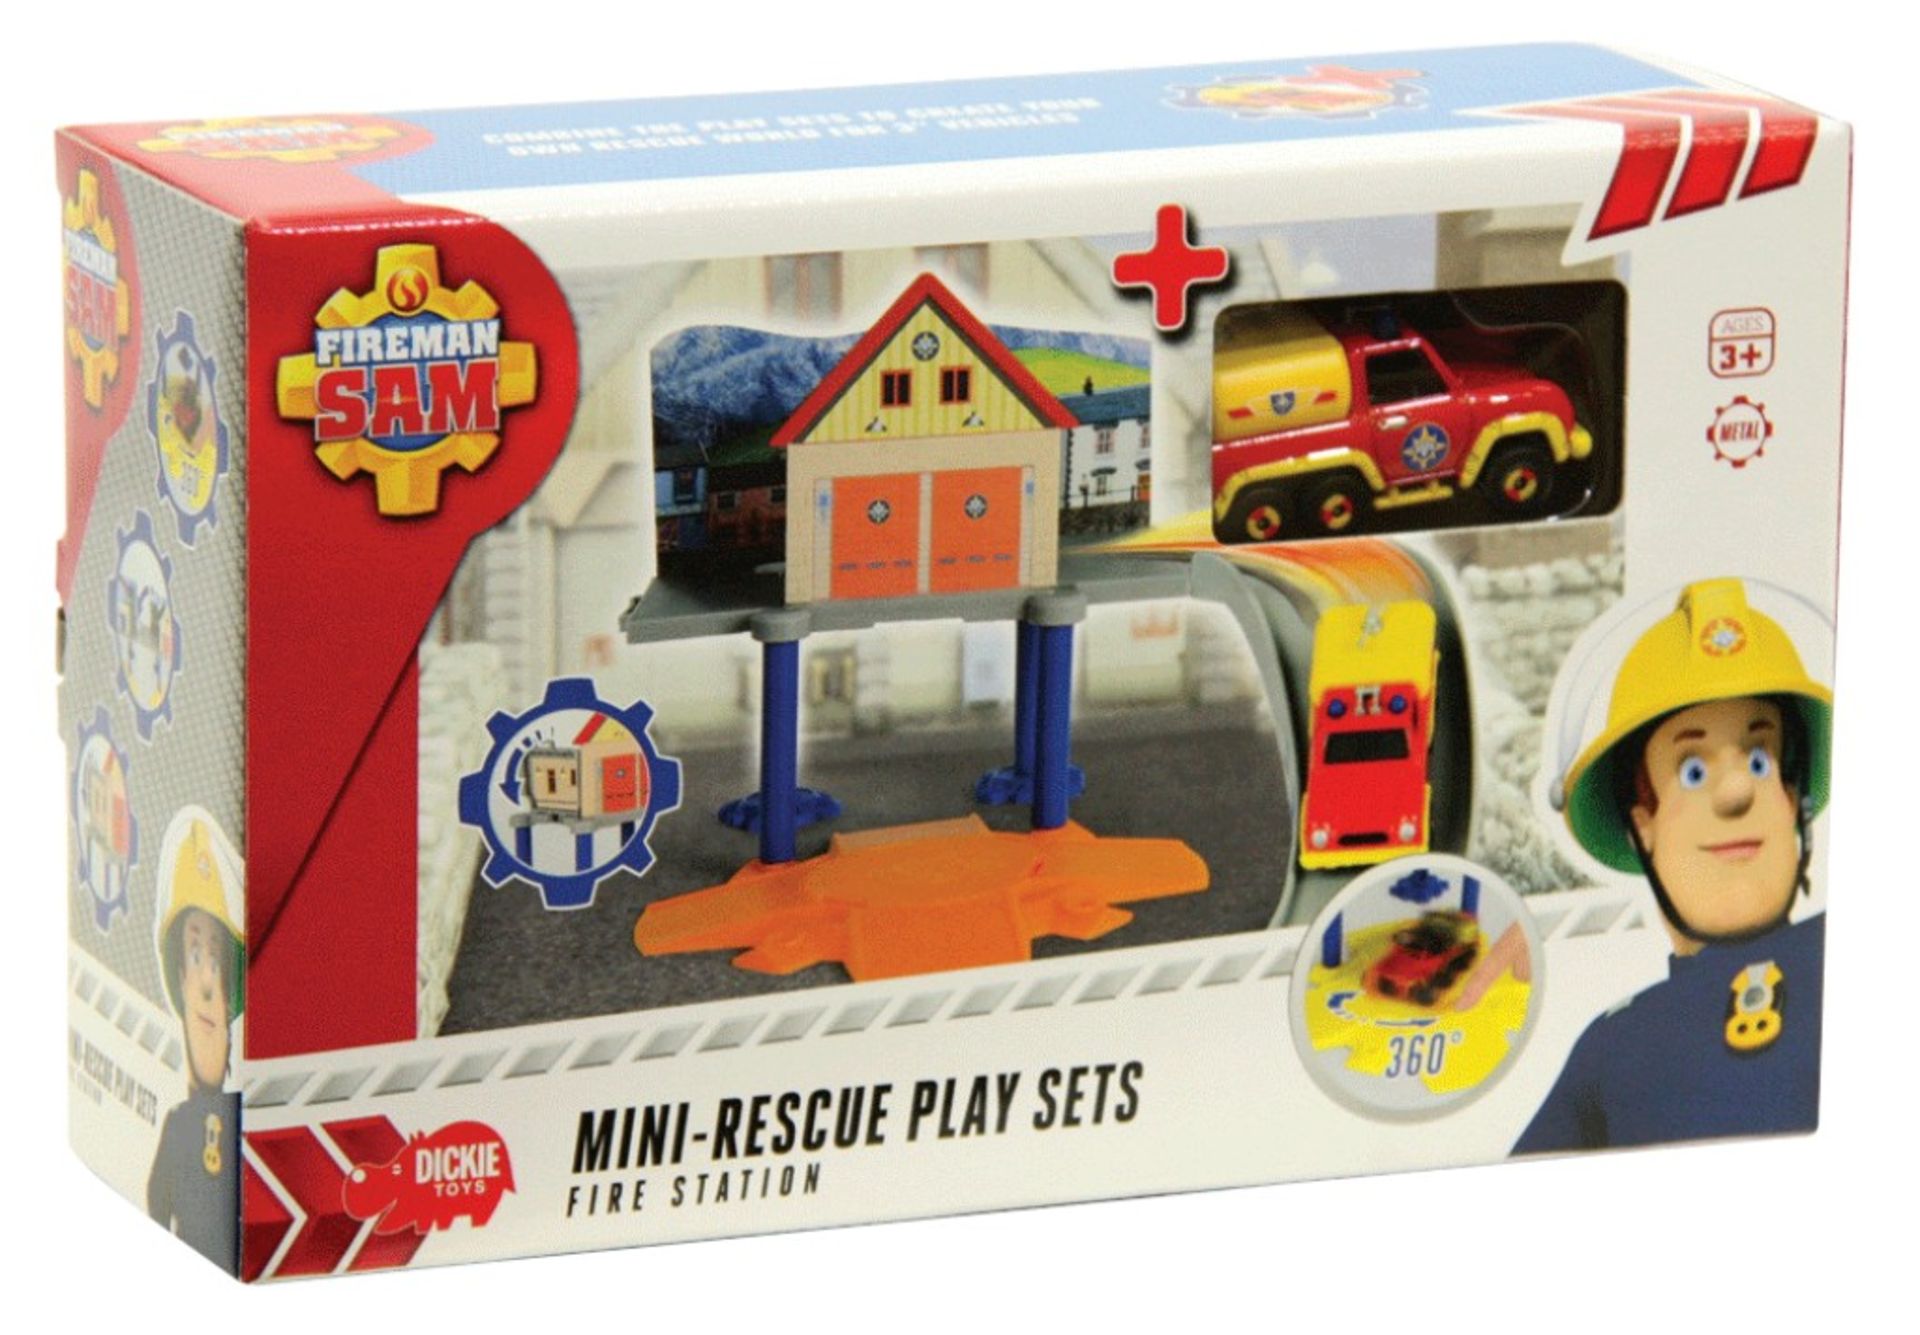 V *TRADE QTY* Brand New Fireman Sam Mini-Rescue Fire Station Boat House Playset ISP - £14.99